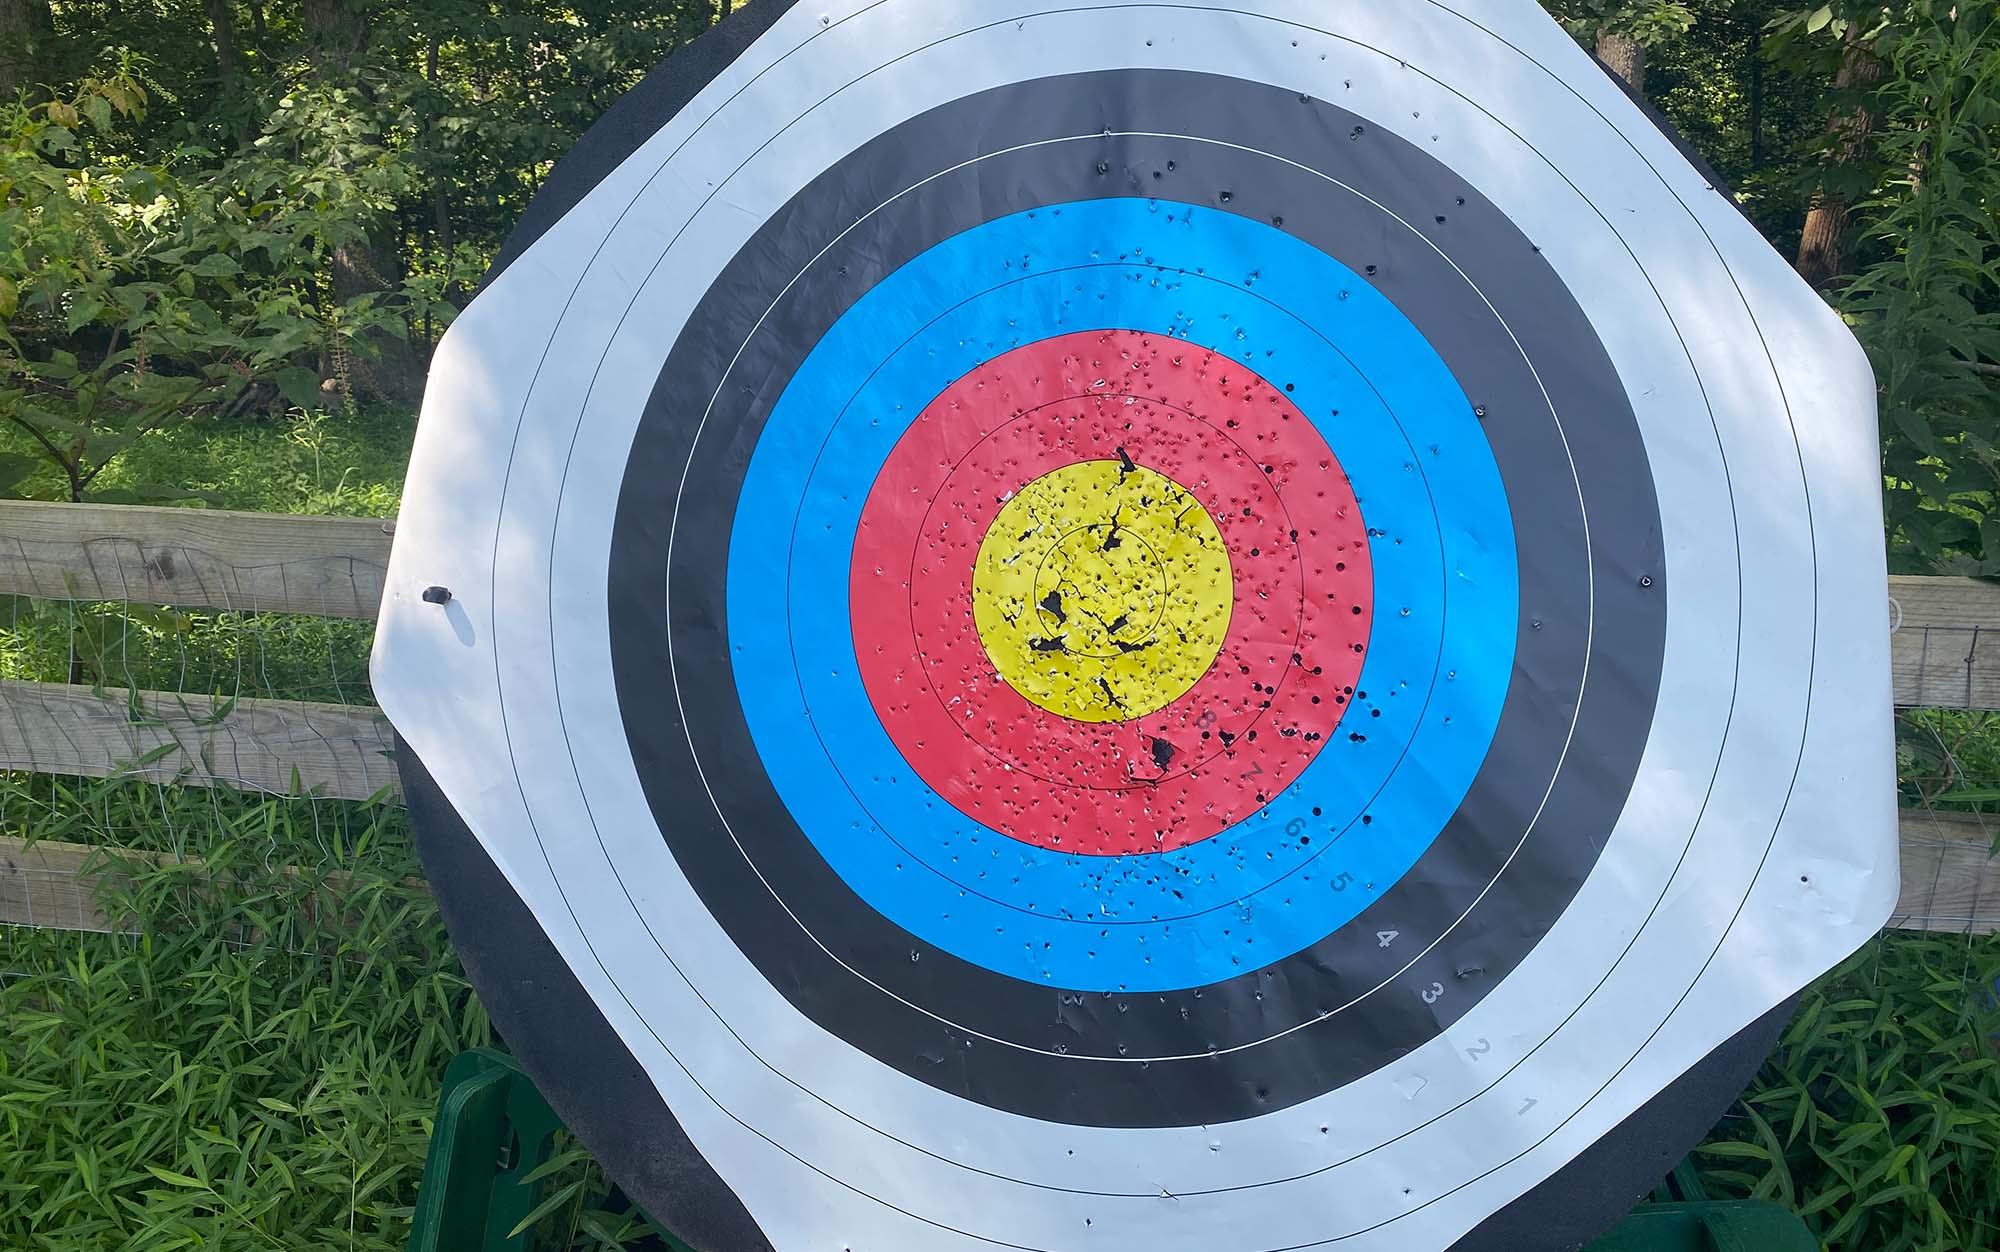 The Best Archery Targets of 2022